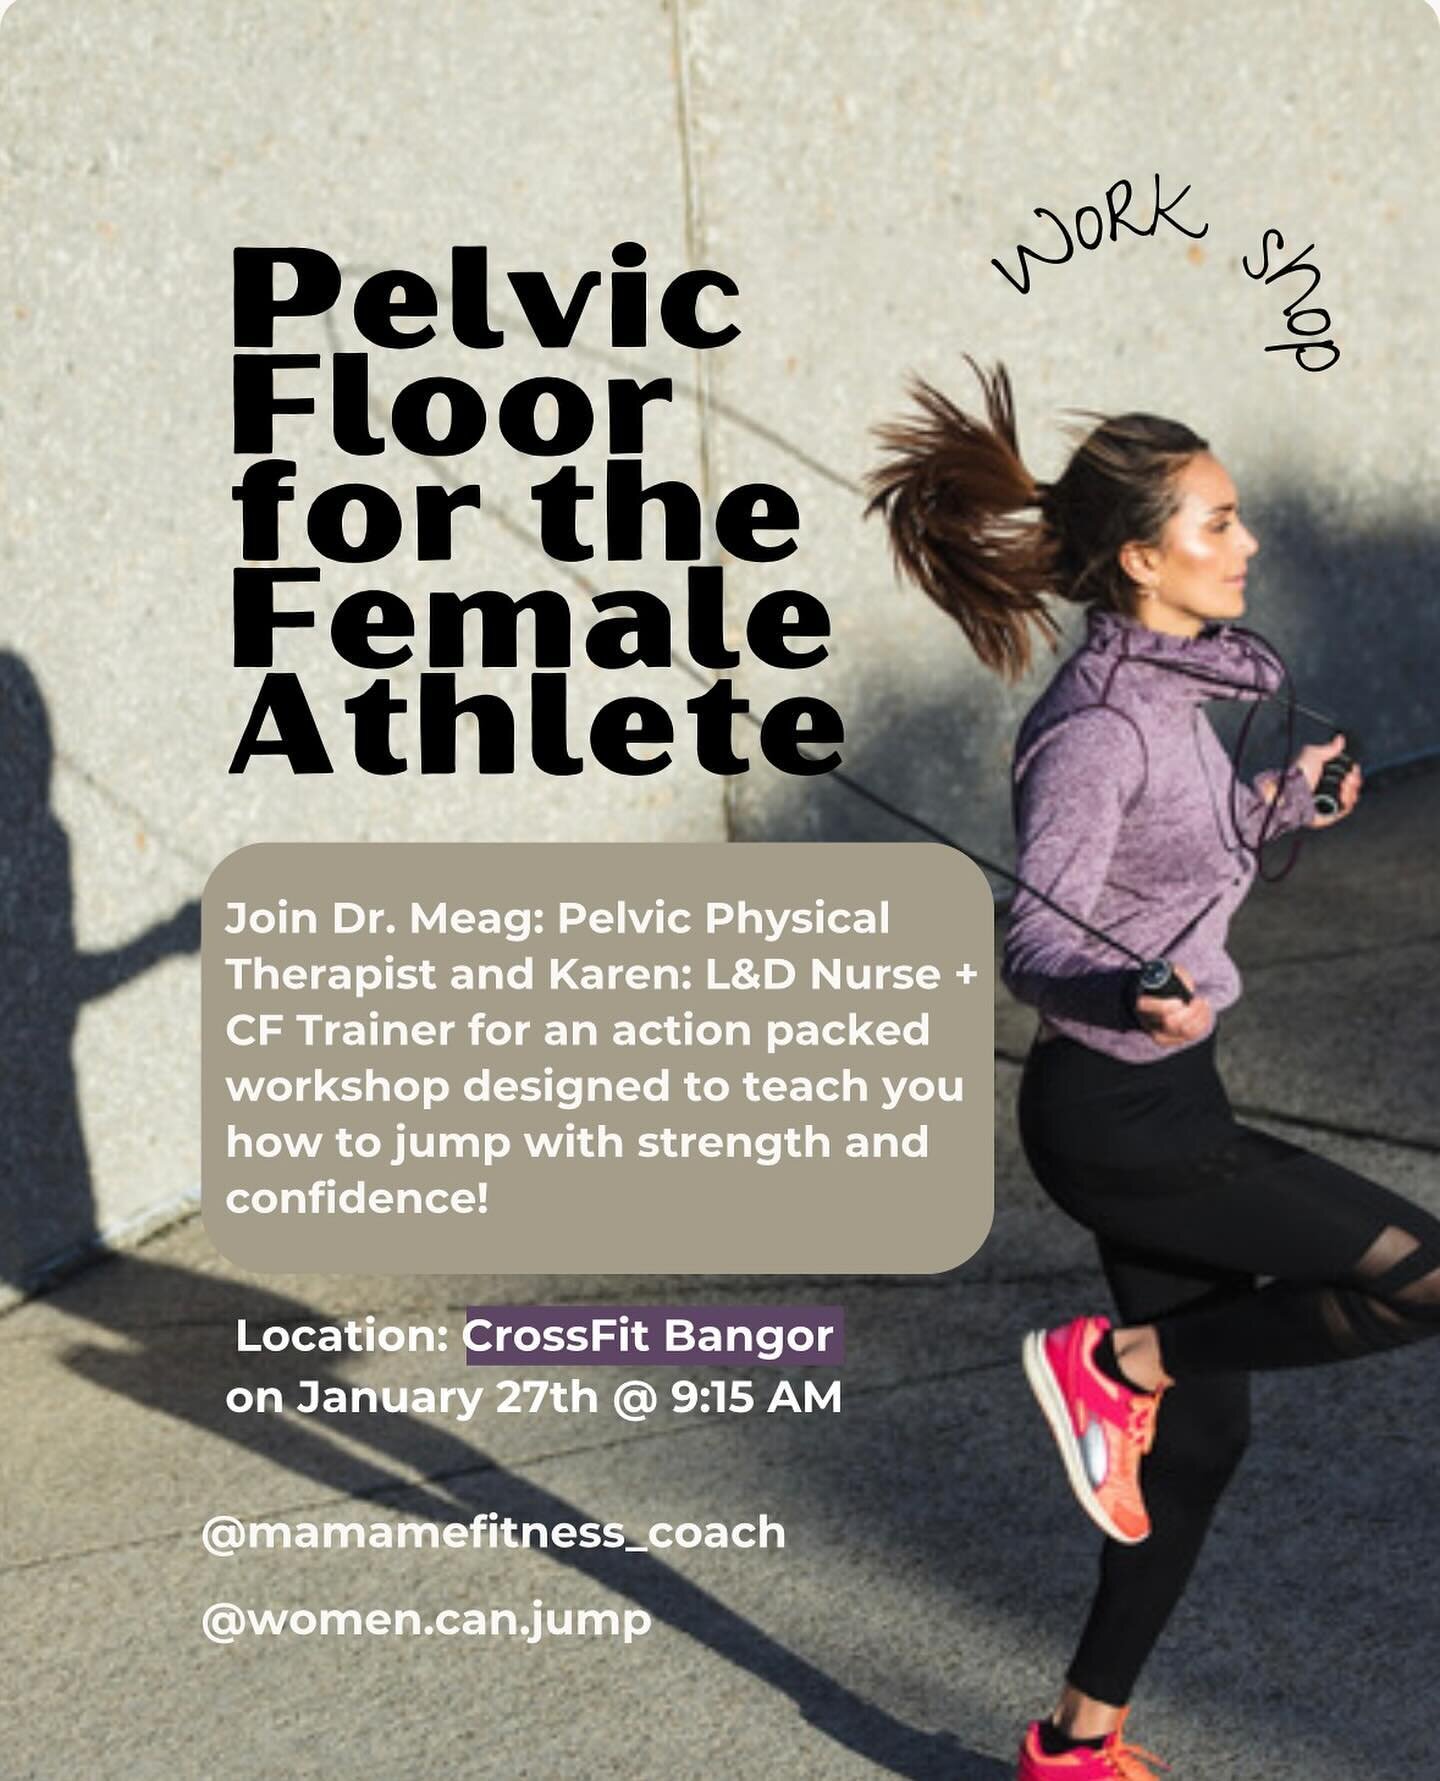 Don&rsquo;t wait to sign up, spots are filling up.  Join us at CrossFit Bangor on January 27th at 9:15am for Pelvic Floor Seminar! Spots are filling up fast, sign up now to secure your spot in this great workshop! 

This fun and educational workshop 